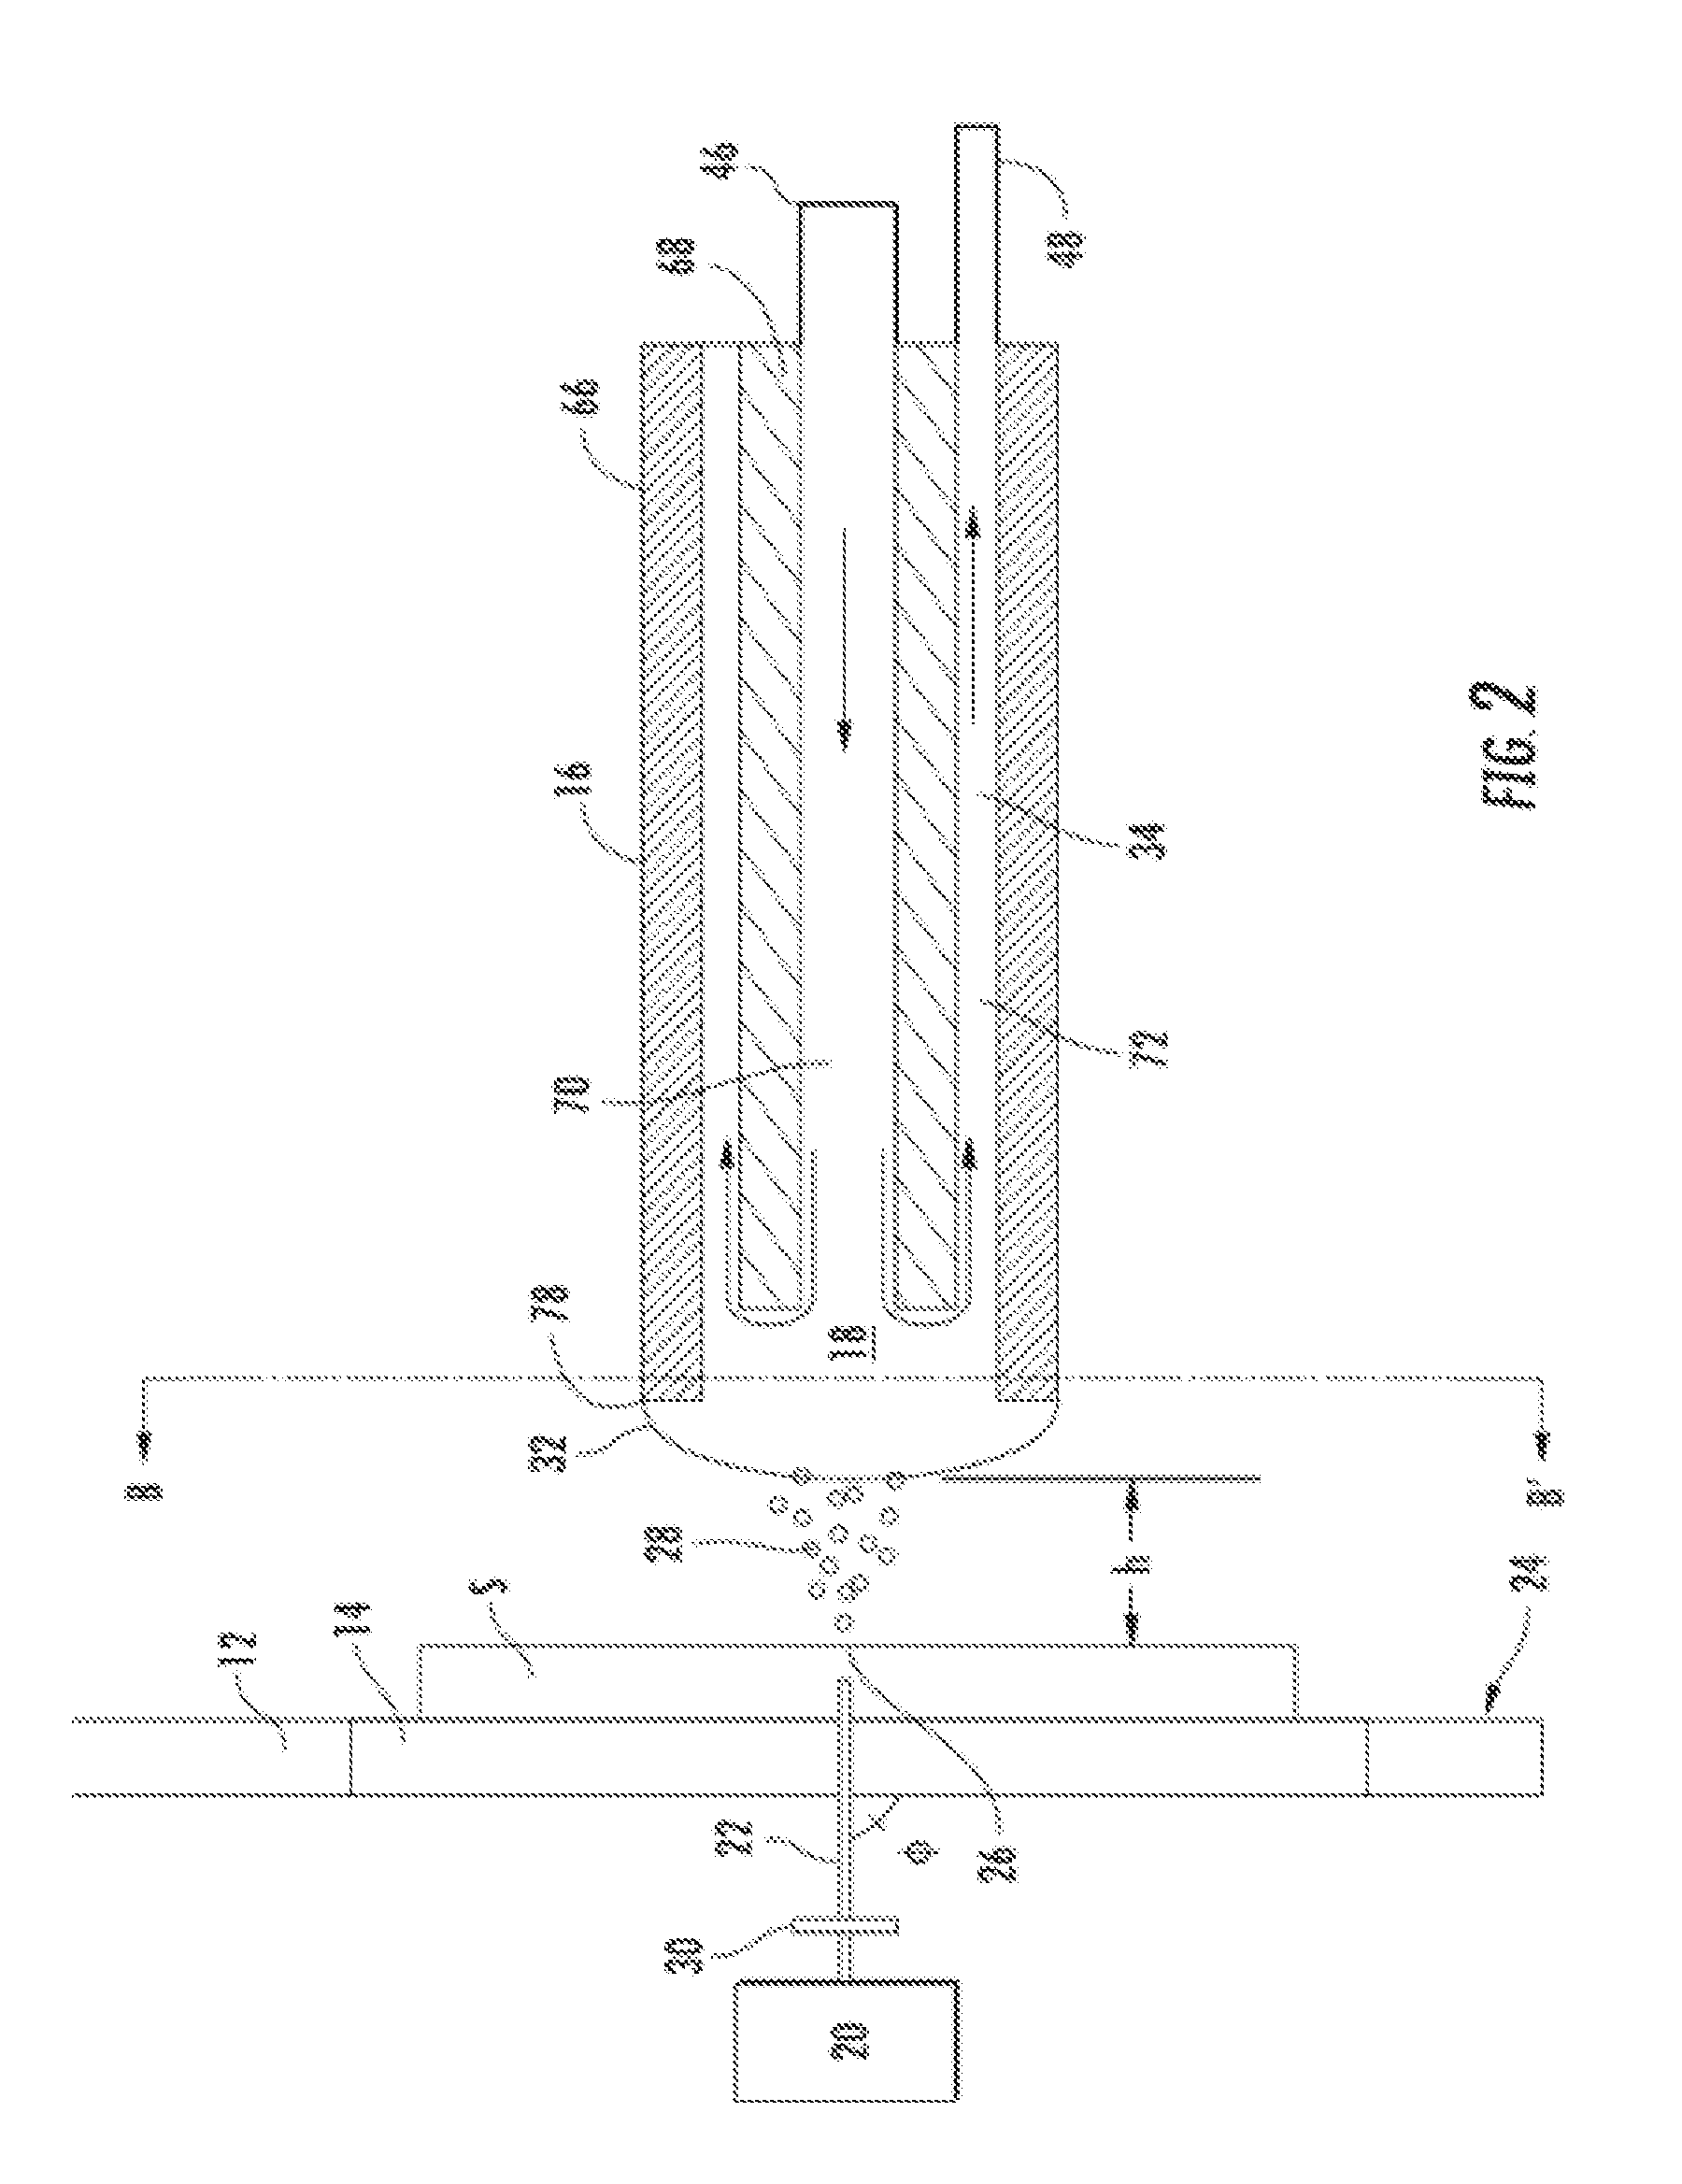 Systems and methods for laser assisted sample transfer to solution for chemical analysis